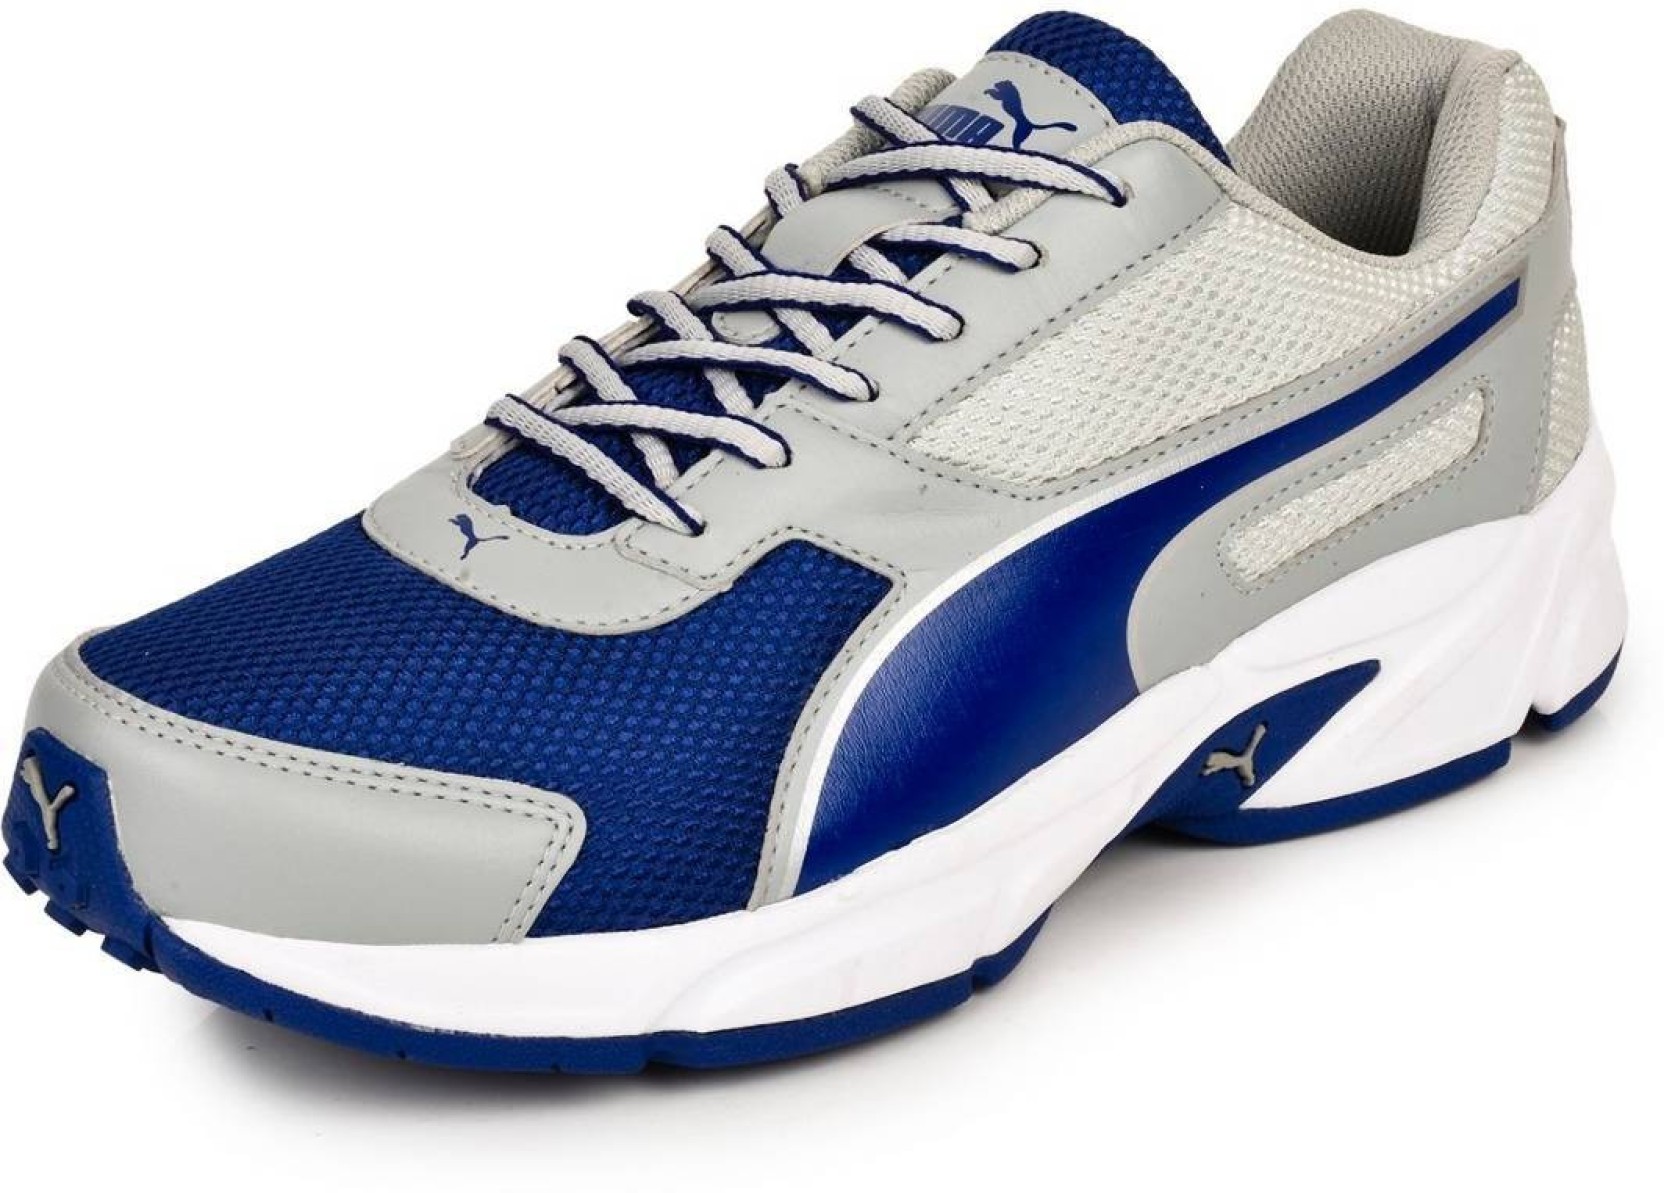 Puma Sneakers - Buy Quarry-MazBlue-Silv-White Color Puma Sneakers Online at Best Price - Shop ...